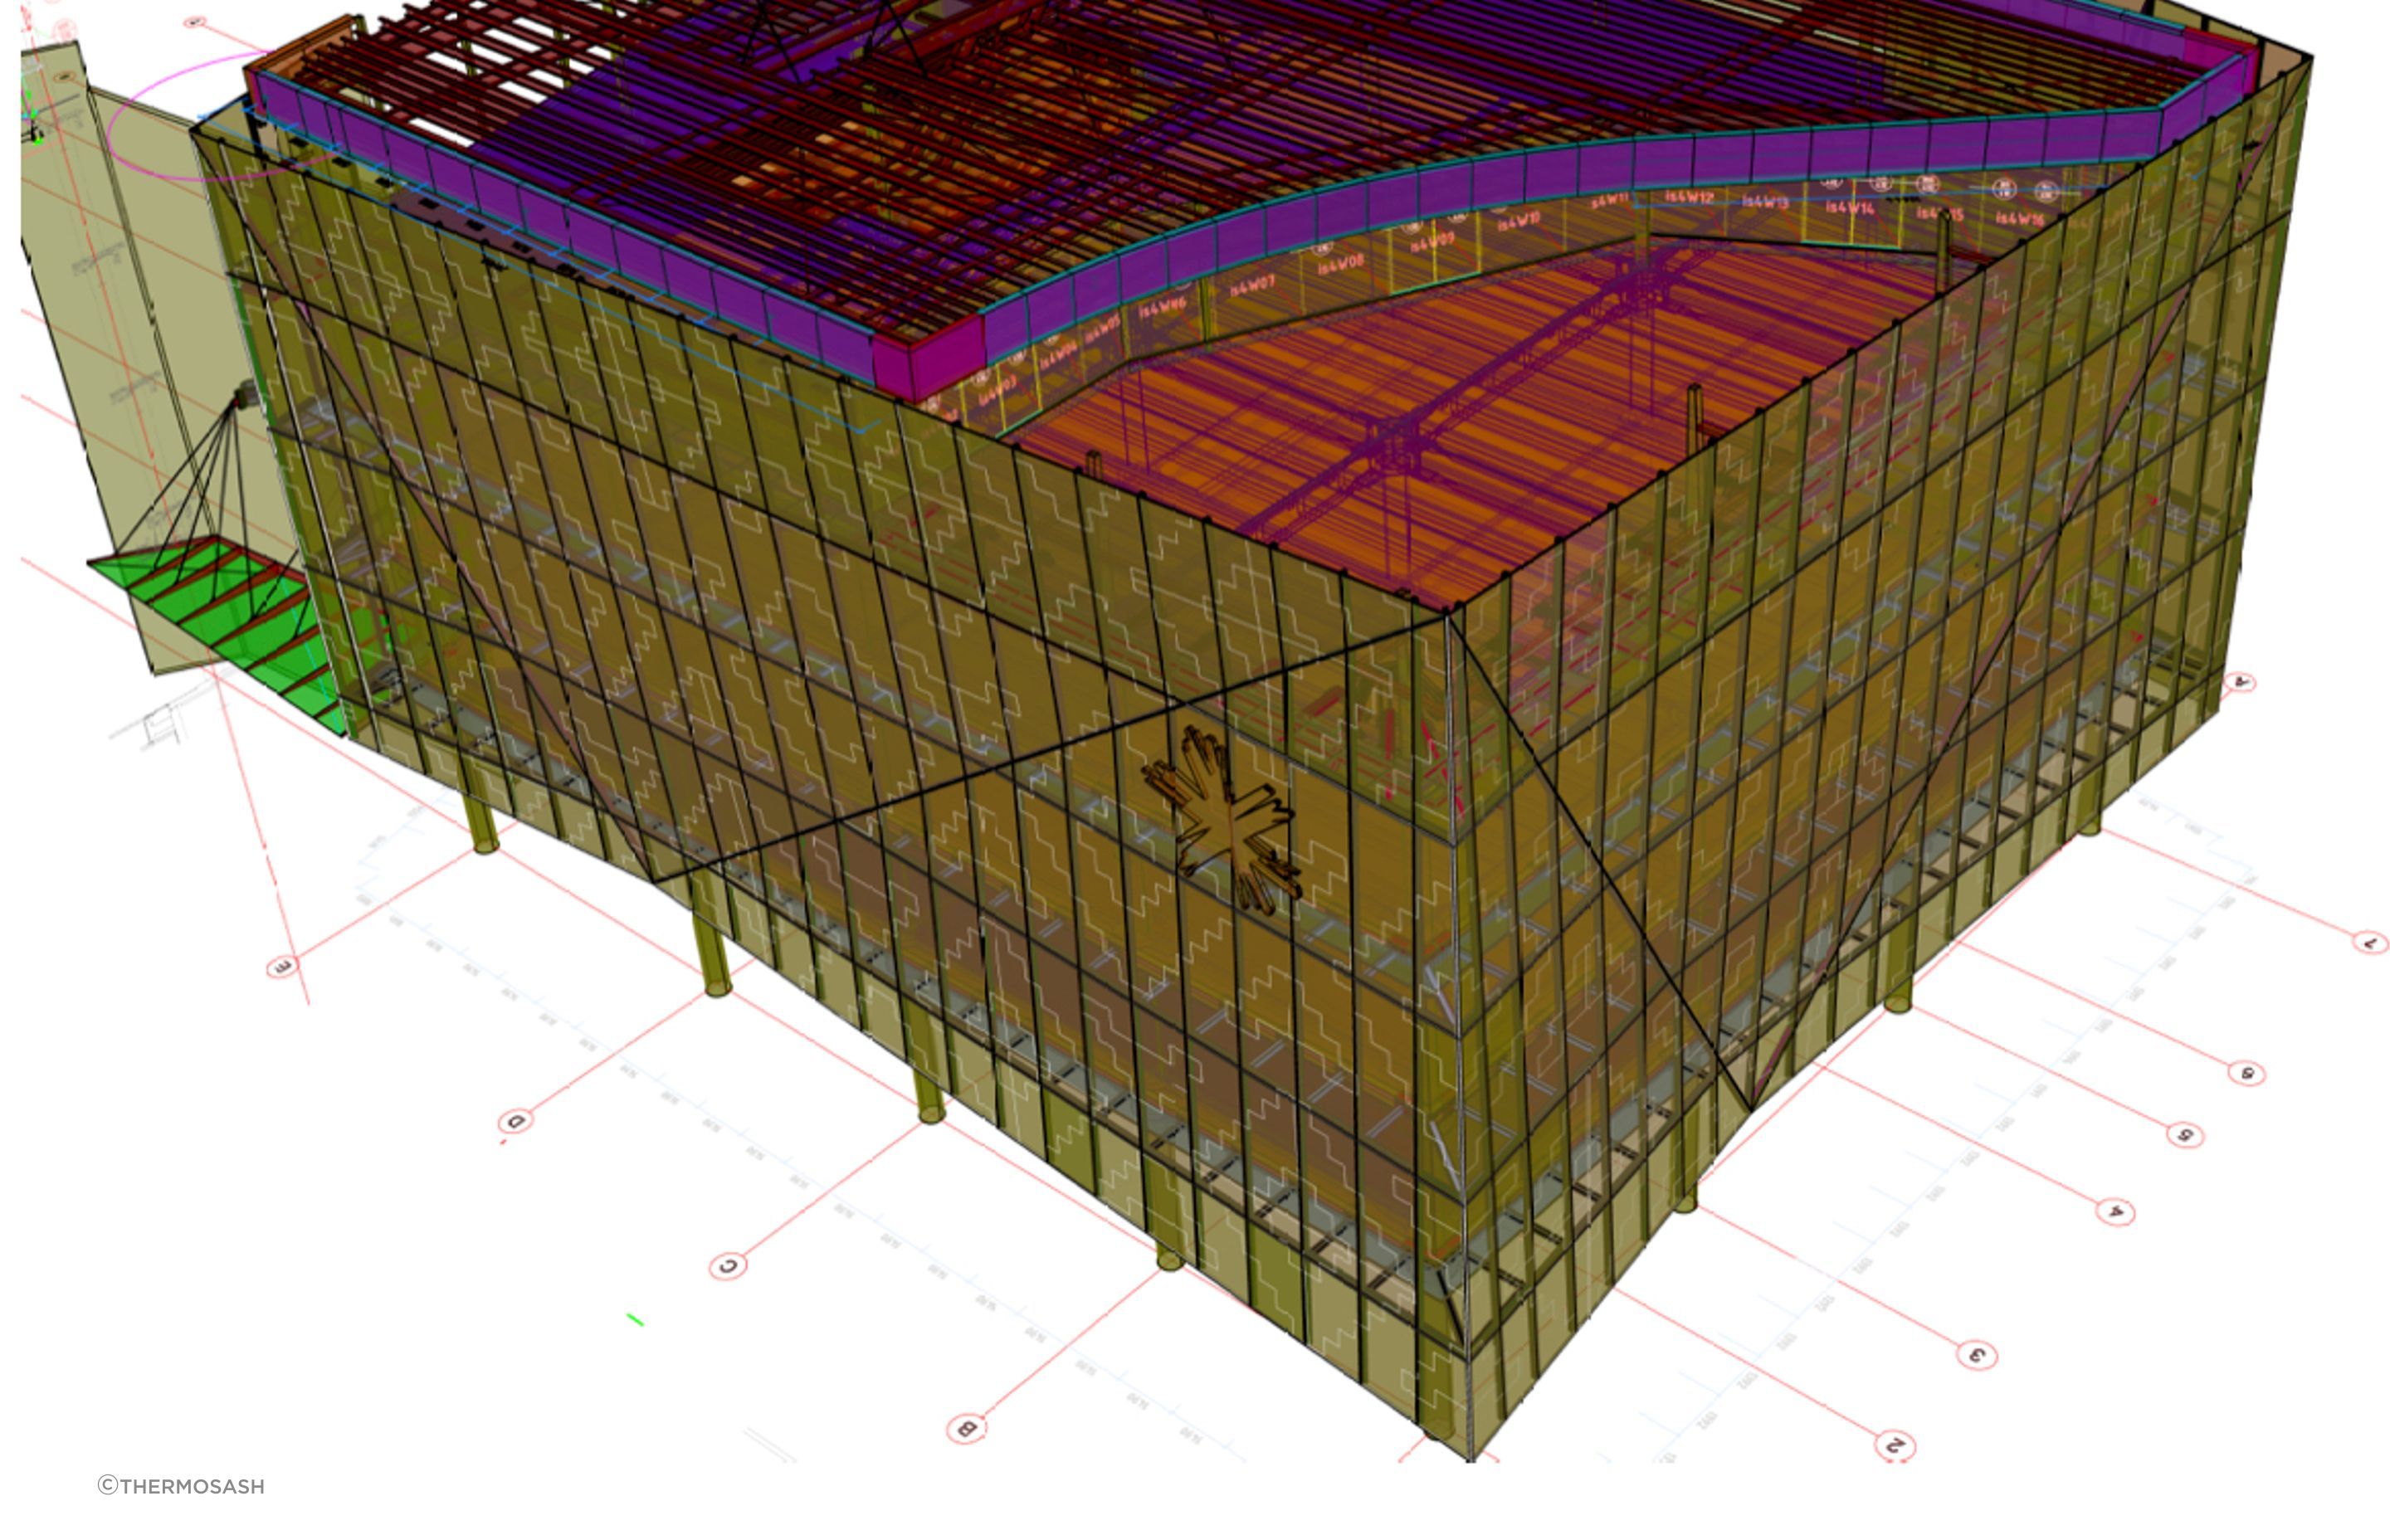 Thermosash's elevation showing its 3D-modelling for the 'twin-skin' element of the facade.
